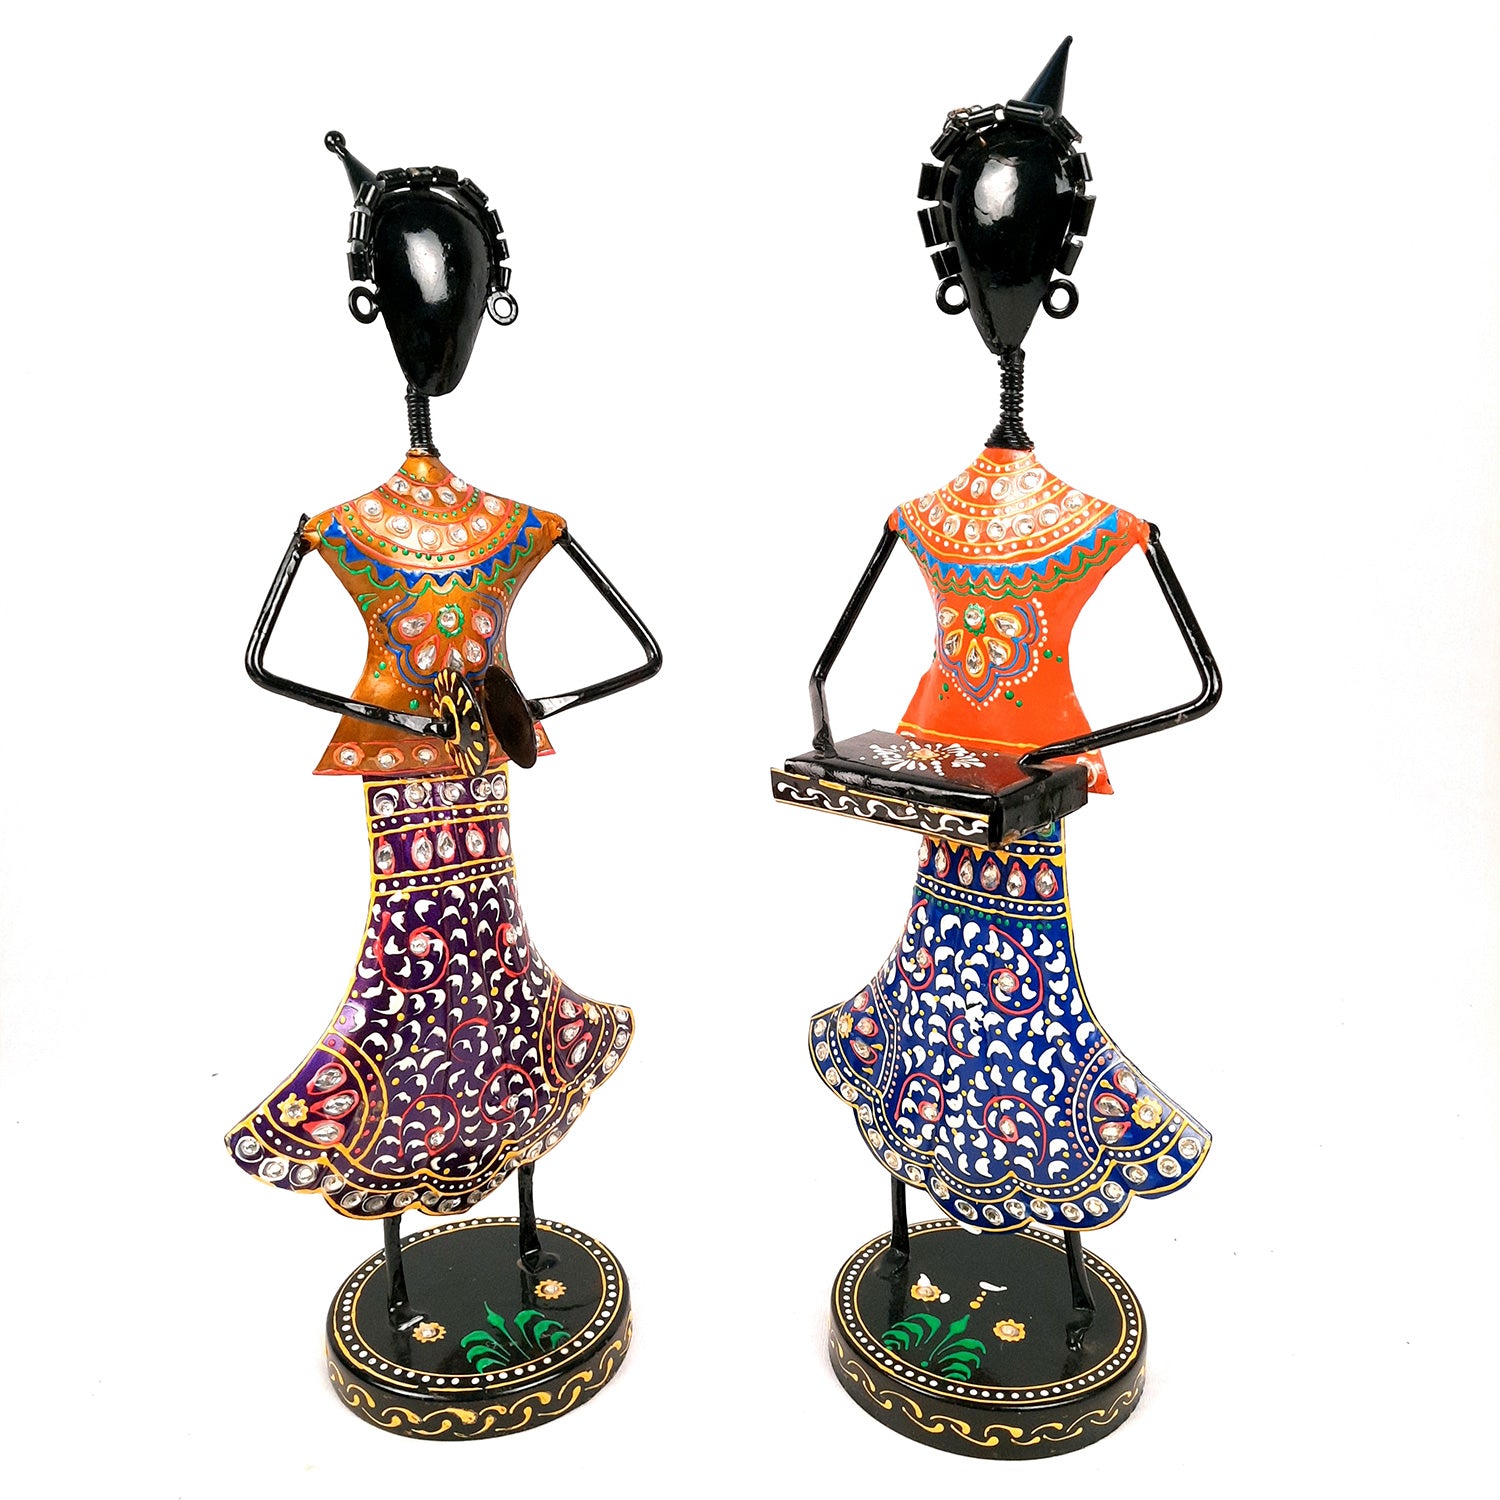 Showpiece Musician Girls Playing Musical Instruments | Decorative Figurines - For Home, Table, Living Room, TV Unit & Gifts - 16 Inch (Set of 2) - Apkamart